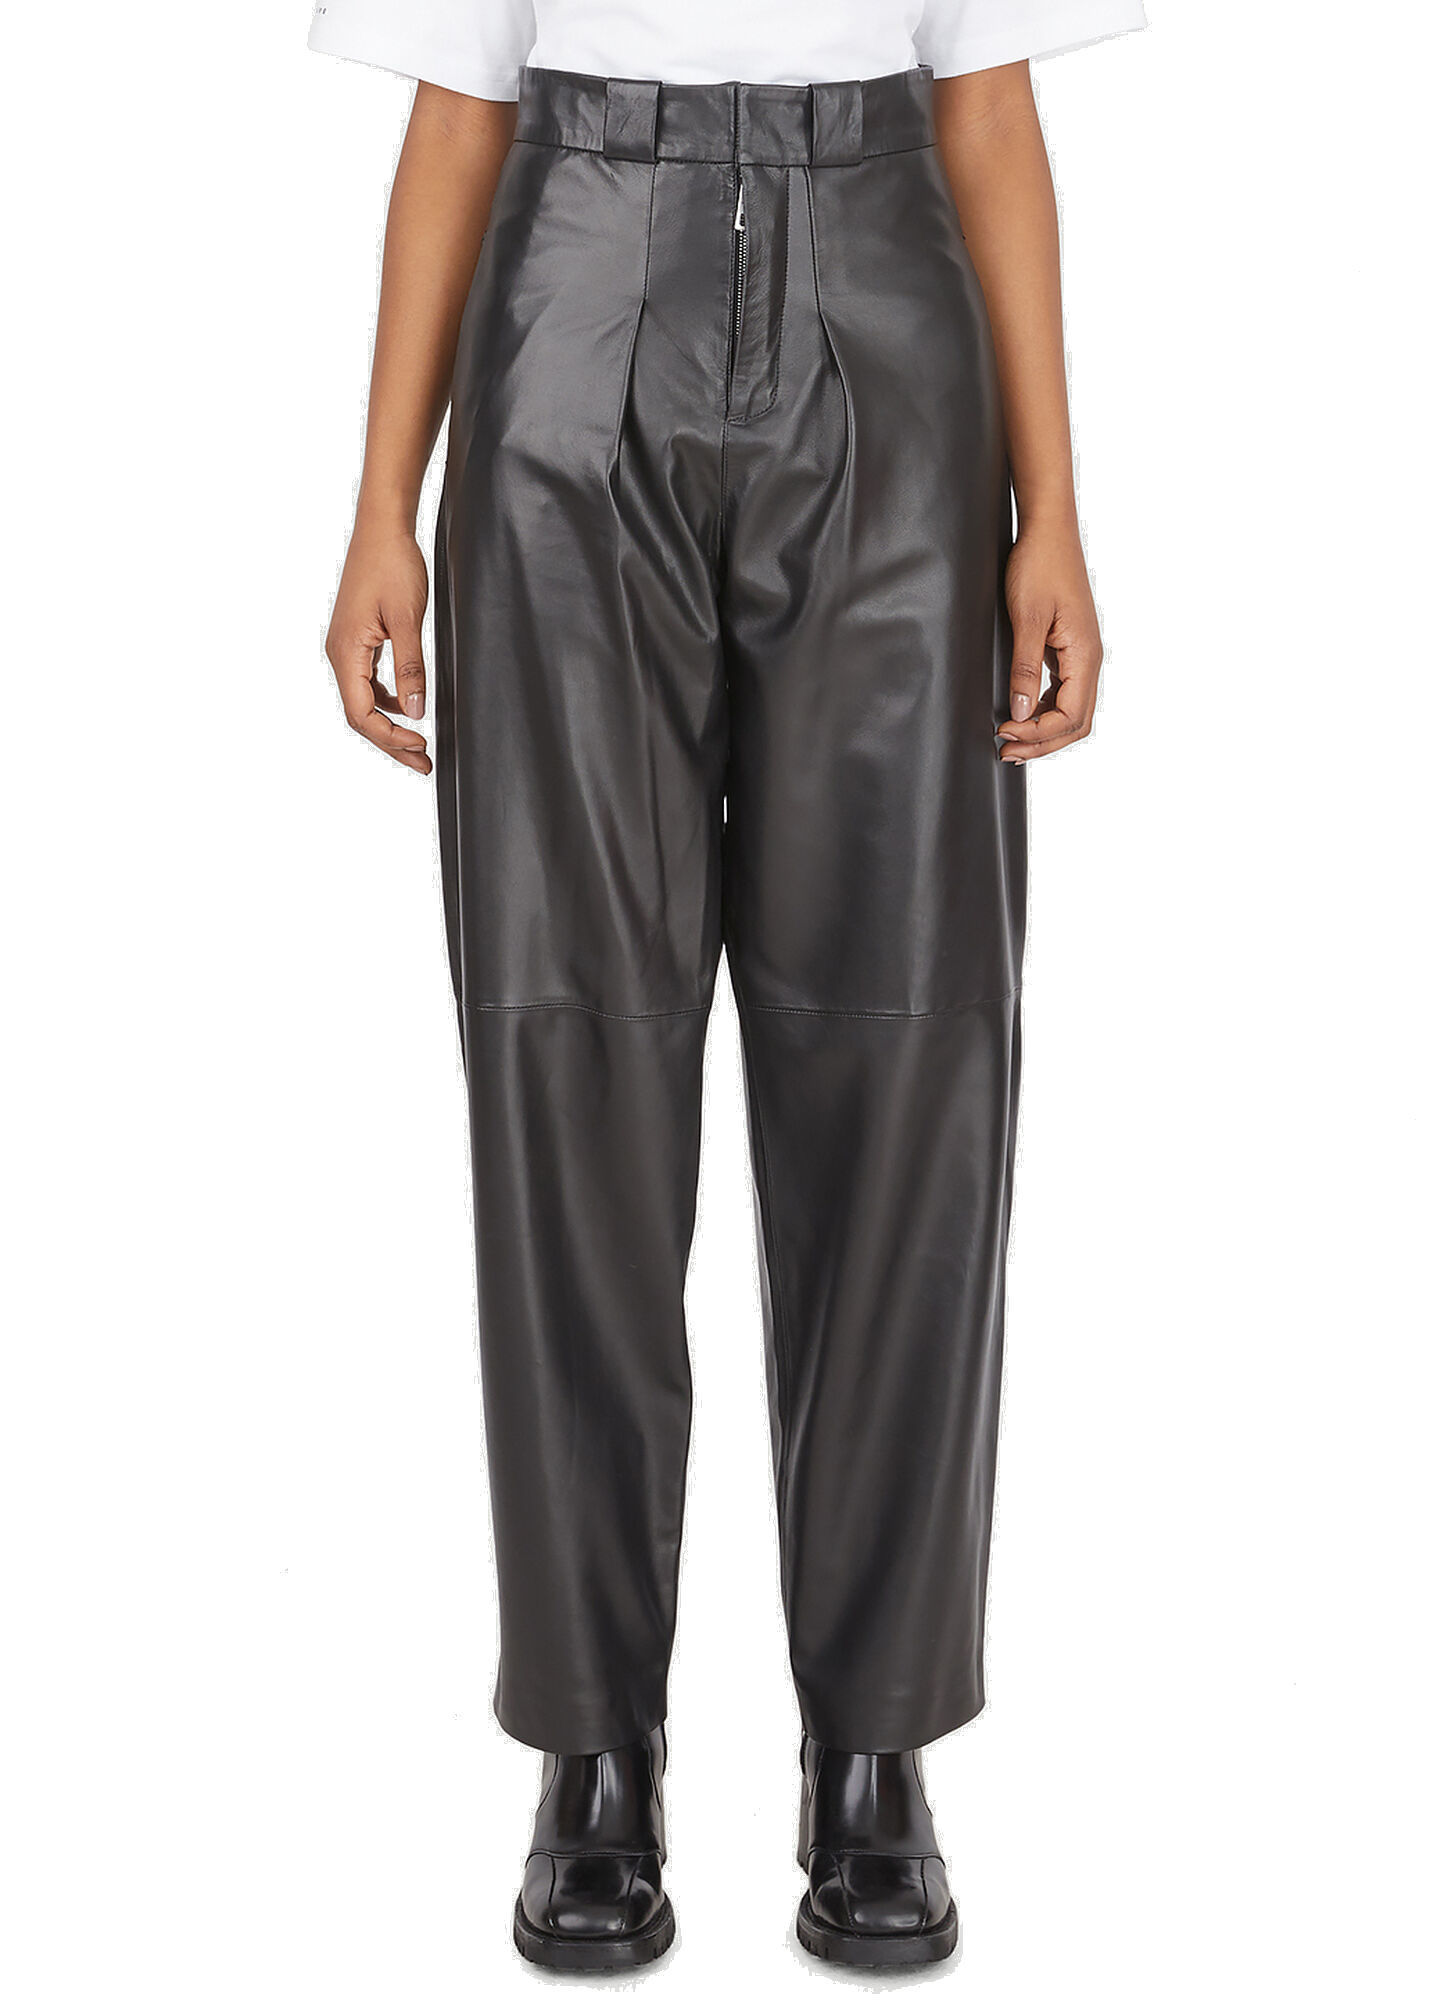 Chiller Pants in Black Common Leisure